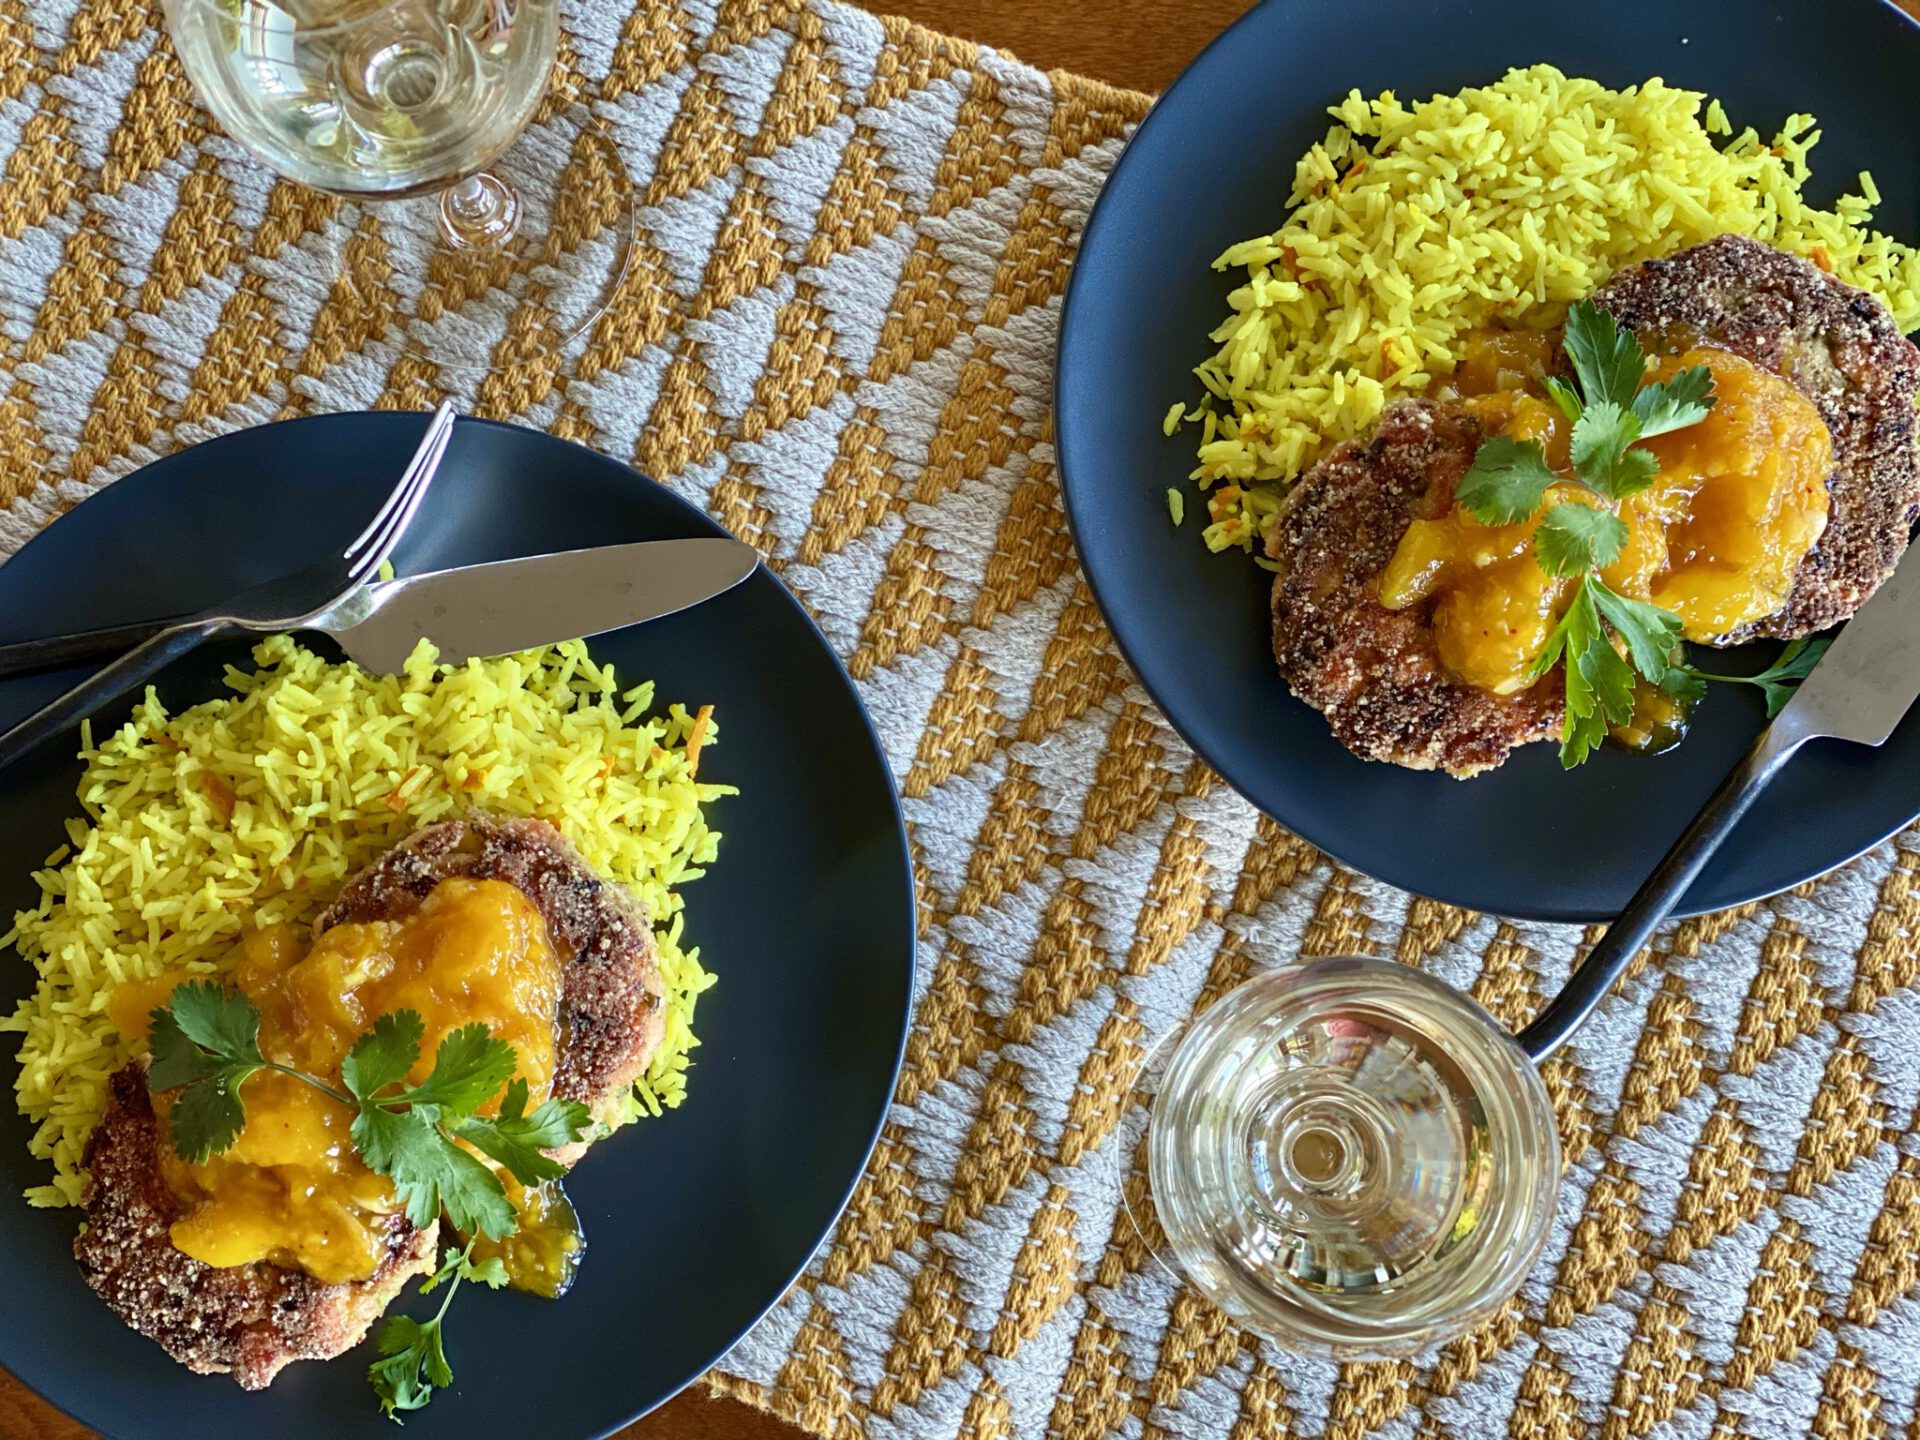 Curried slamon cakes, mango chutney, and coconut rice served on two plates